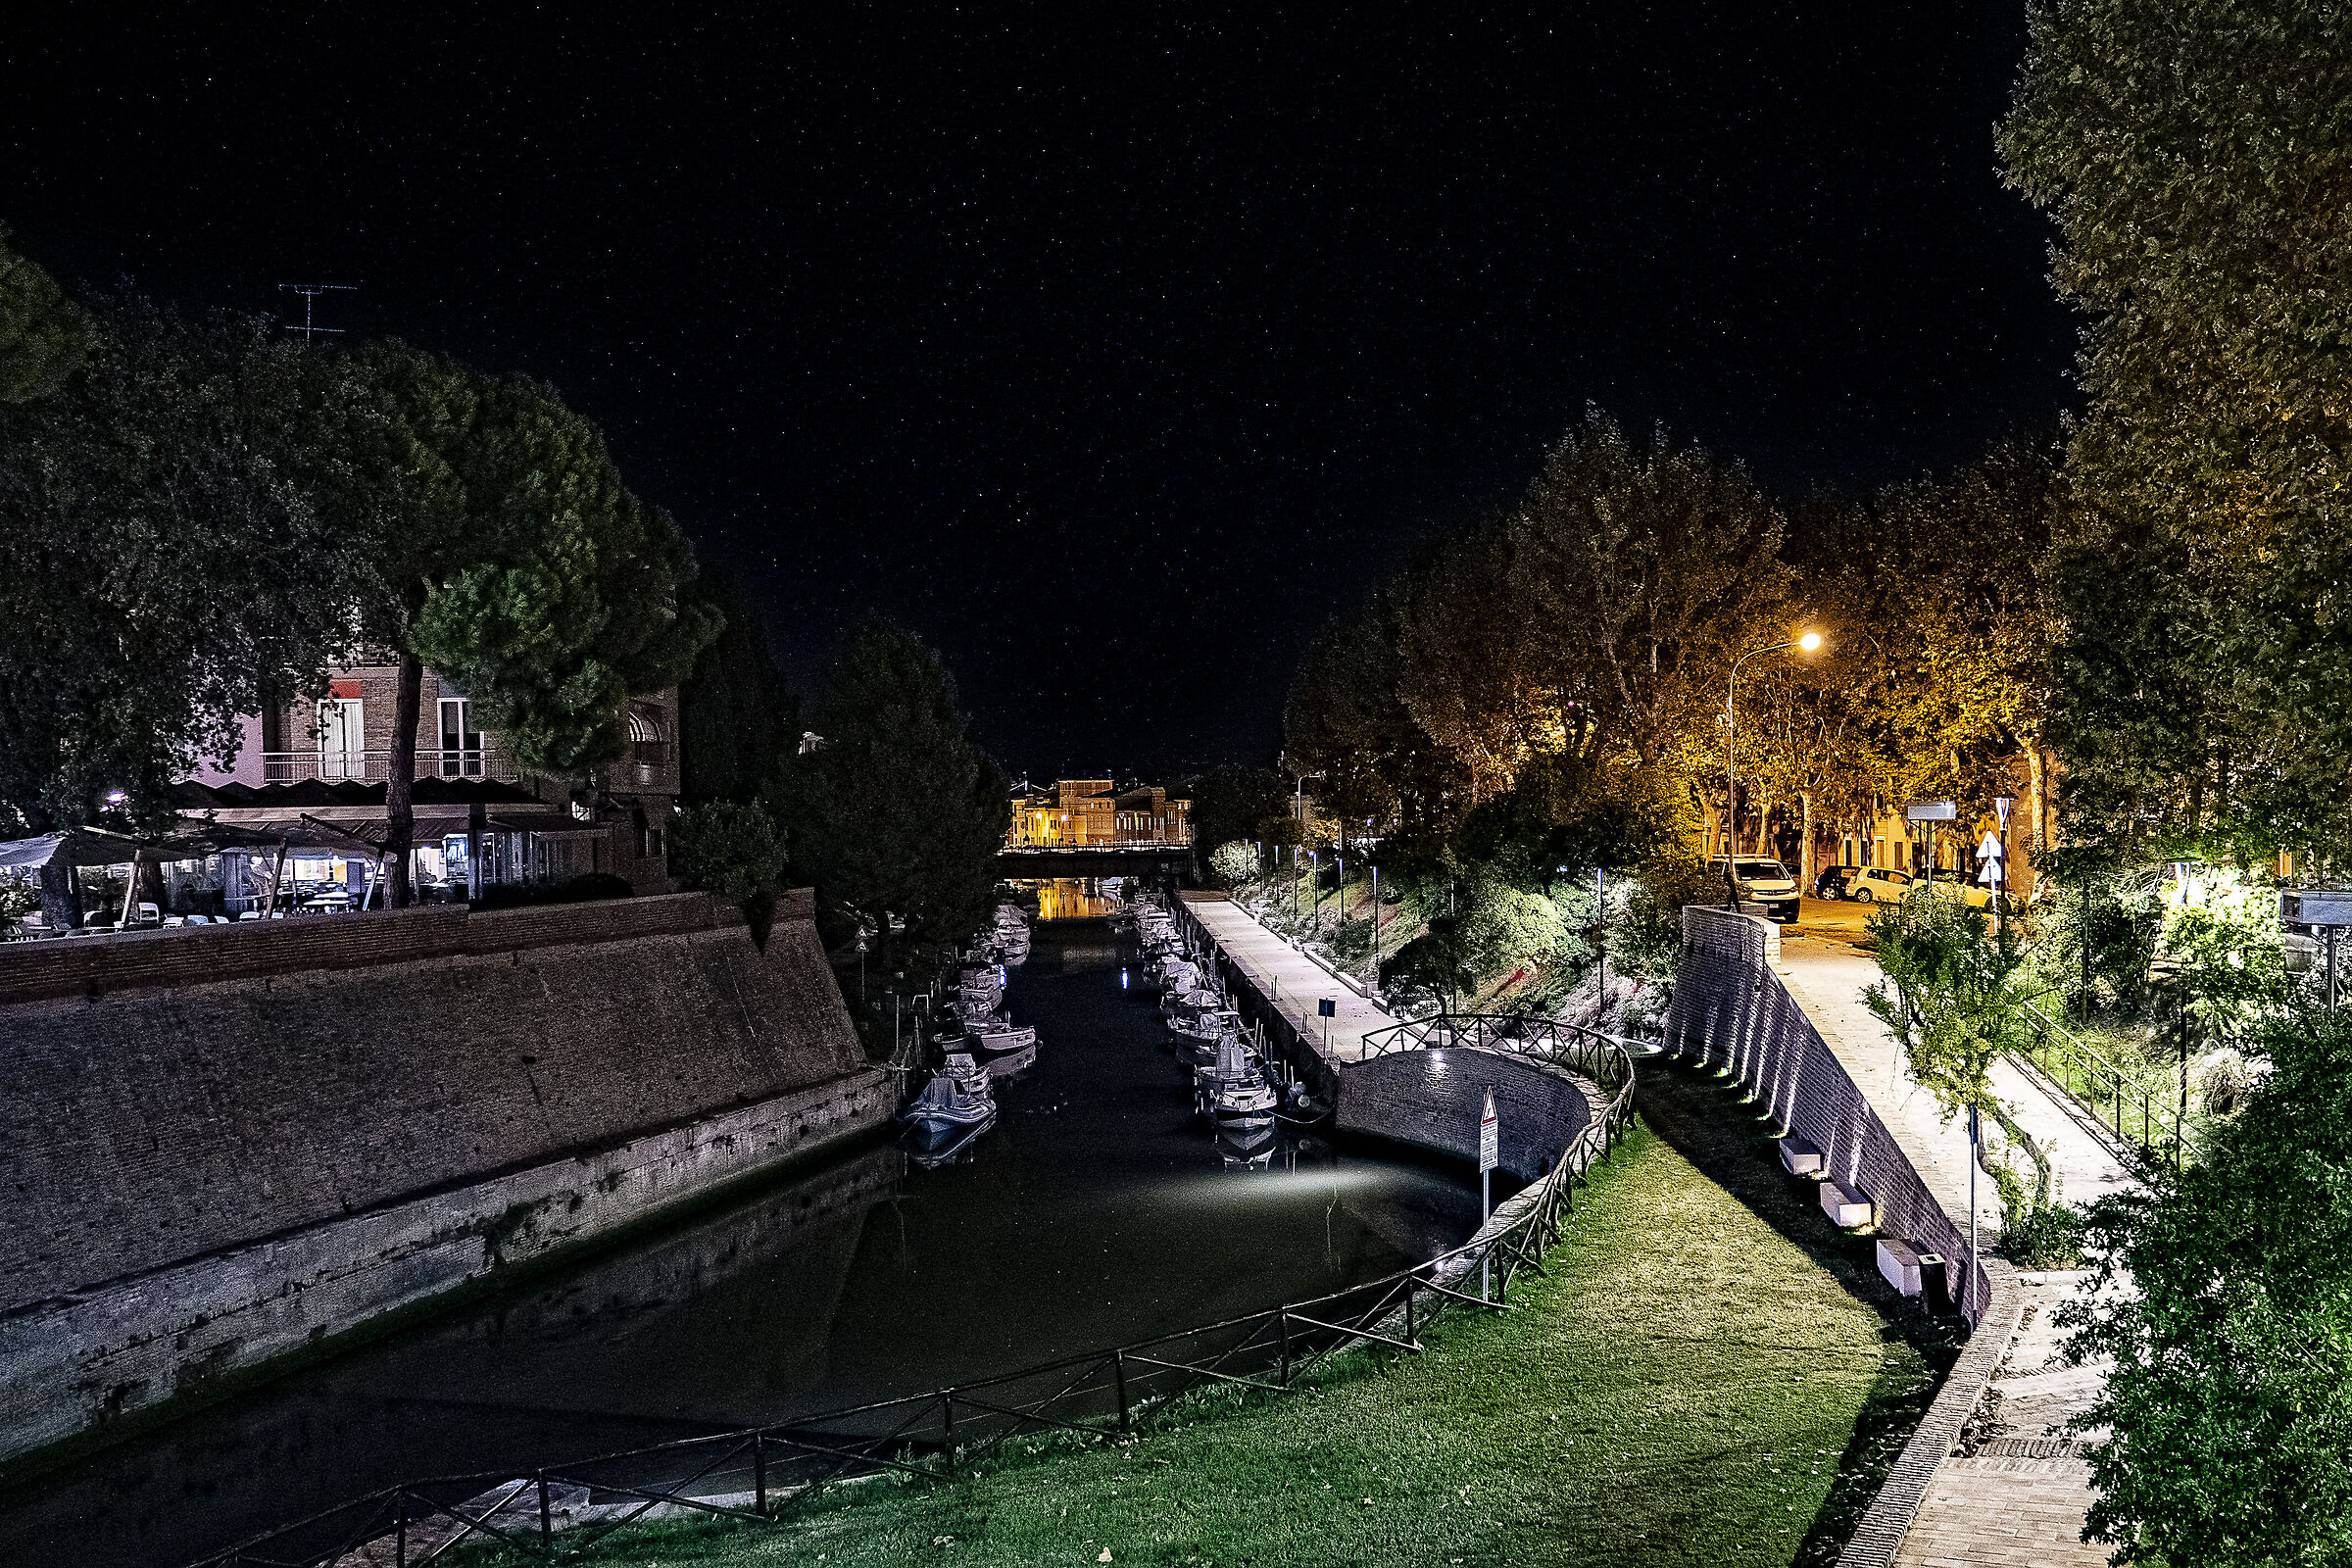 Starry sky on the Albani canal - Fano...